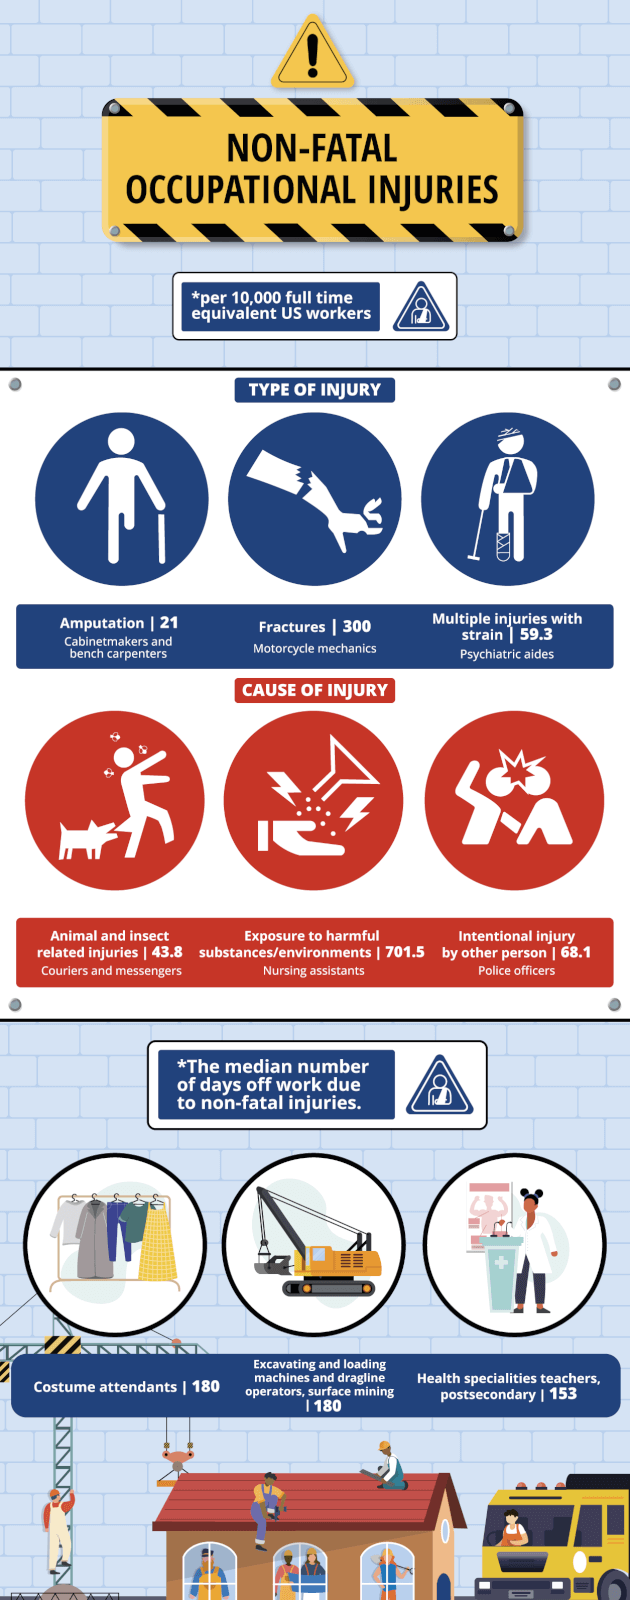 Infographic showing non-fatal occupational injuries often occurring in the workplace.